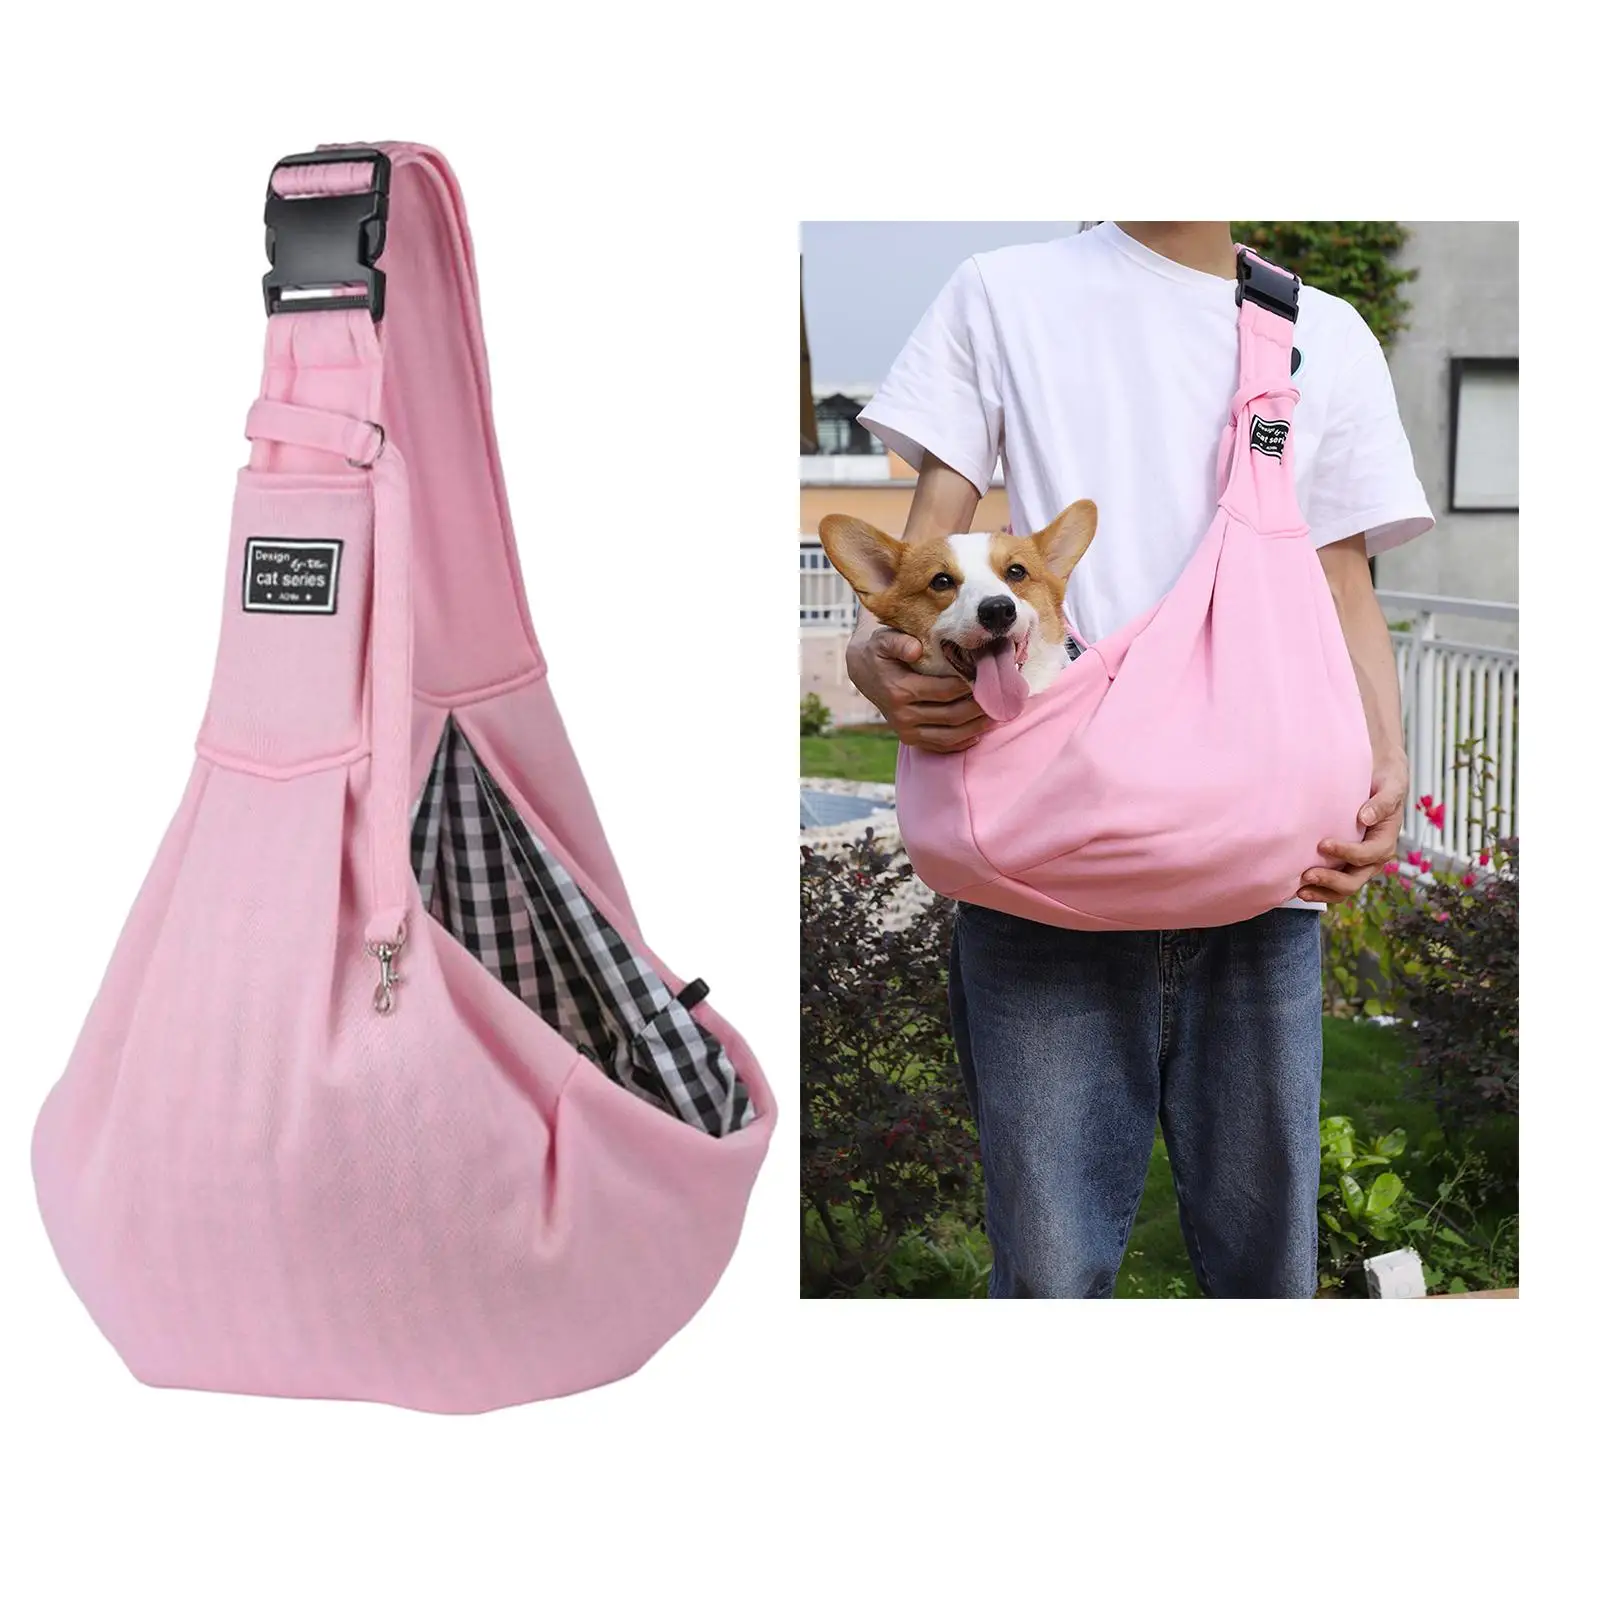 Adjustable Pet Sling Carrier  Medium Large cat and dog Puppy Hiking  Carrying Supplies  Collapsible Shoulder Bag